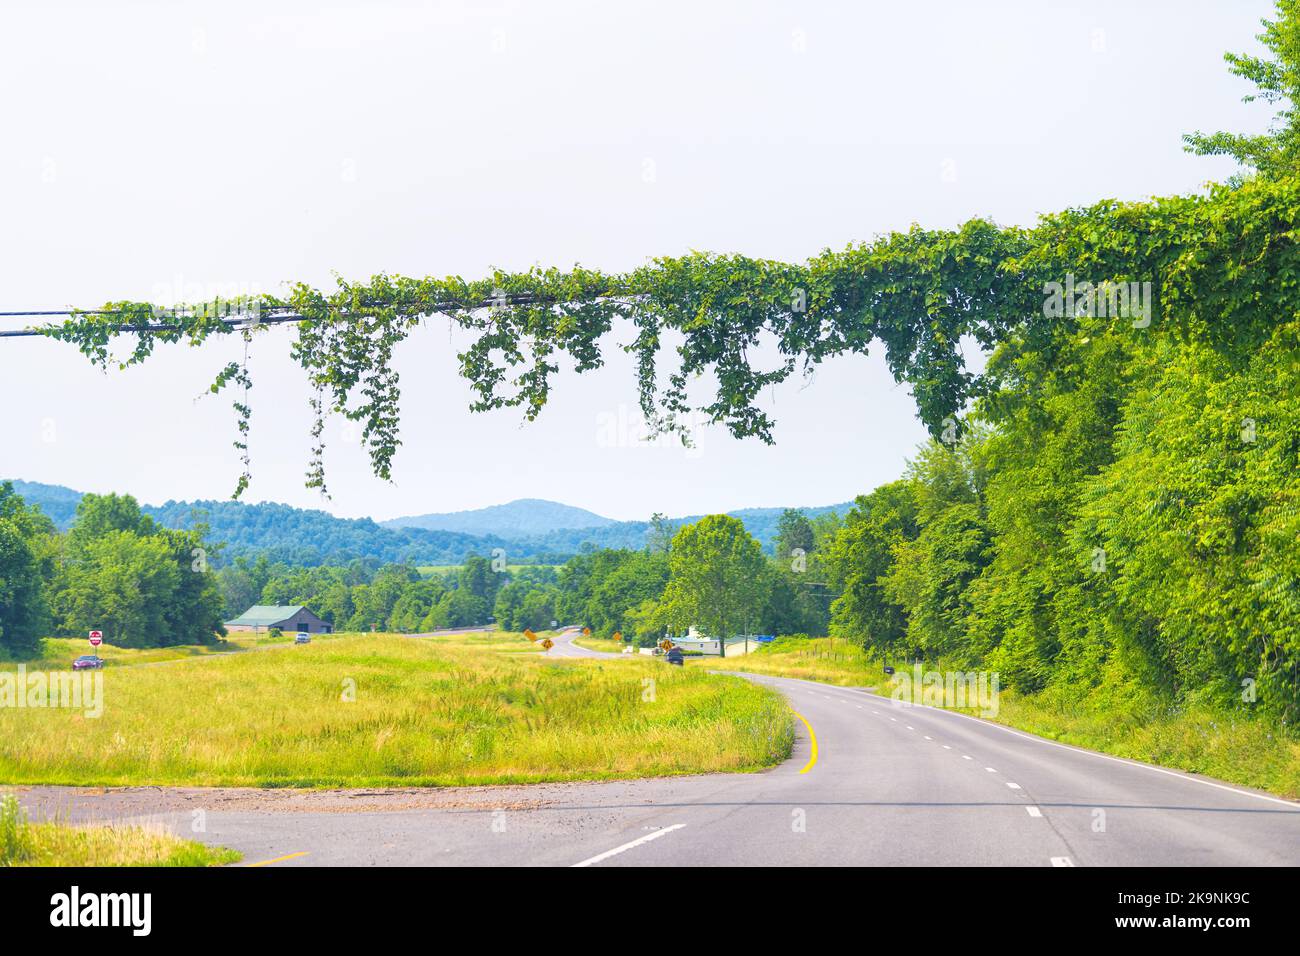 Huntly, Virginia at Rappahannock county highway route 522 road by rolling hills country countryside rural background in Appalachian mountains Stock Photo